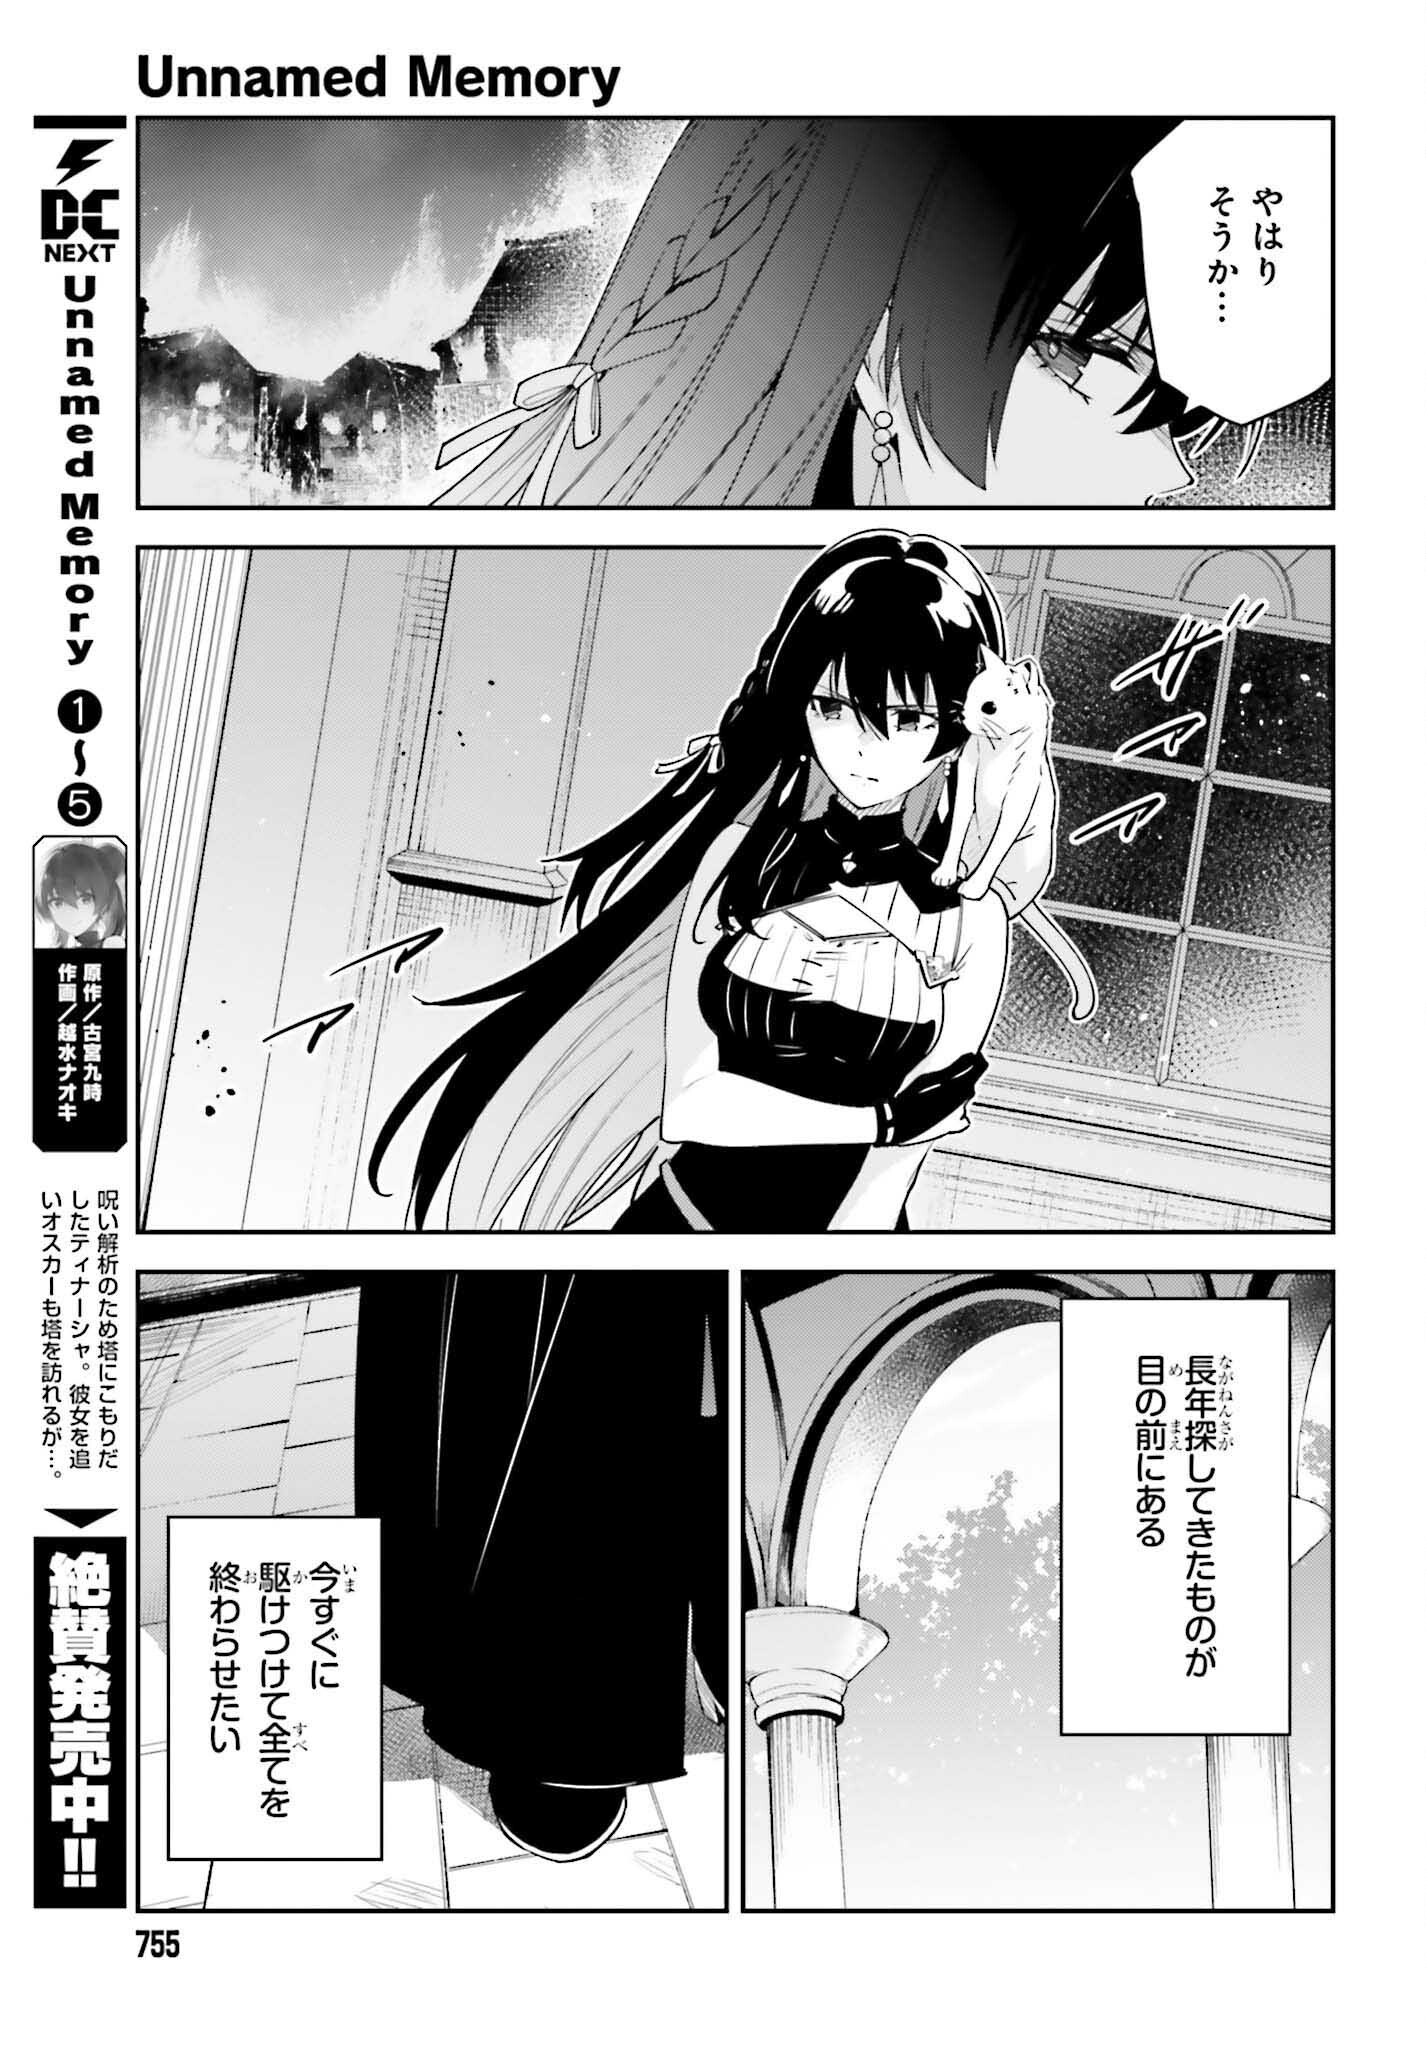 Unnamed Memory 第31話 - Page 3